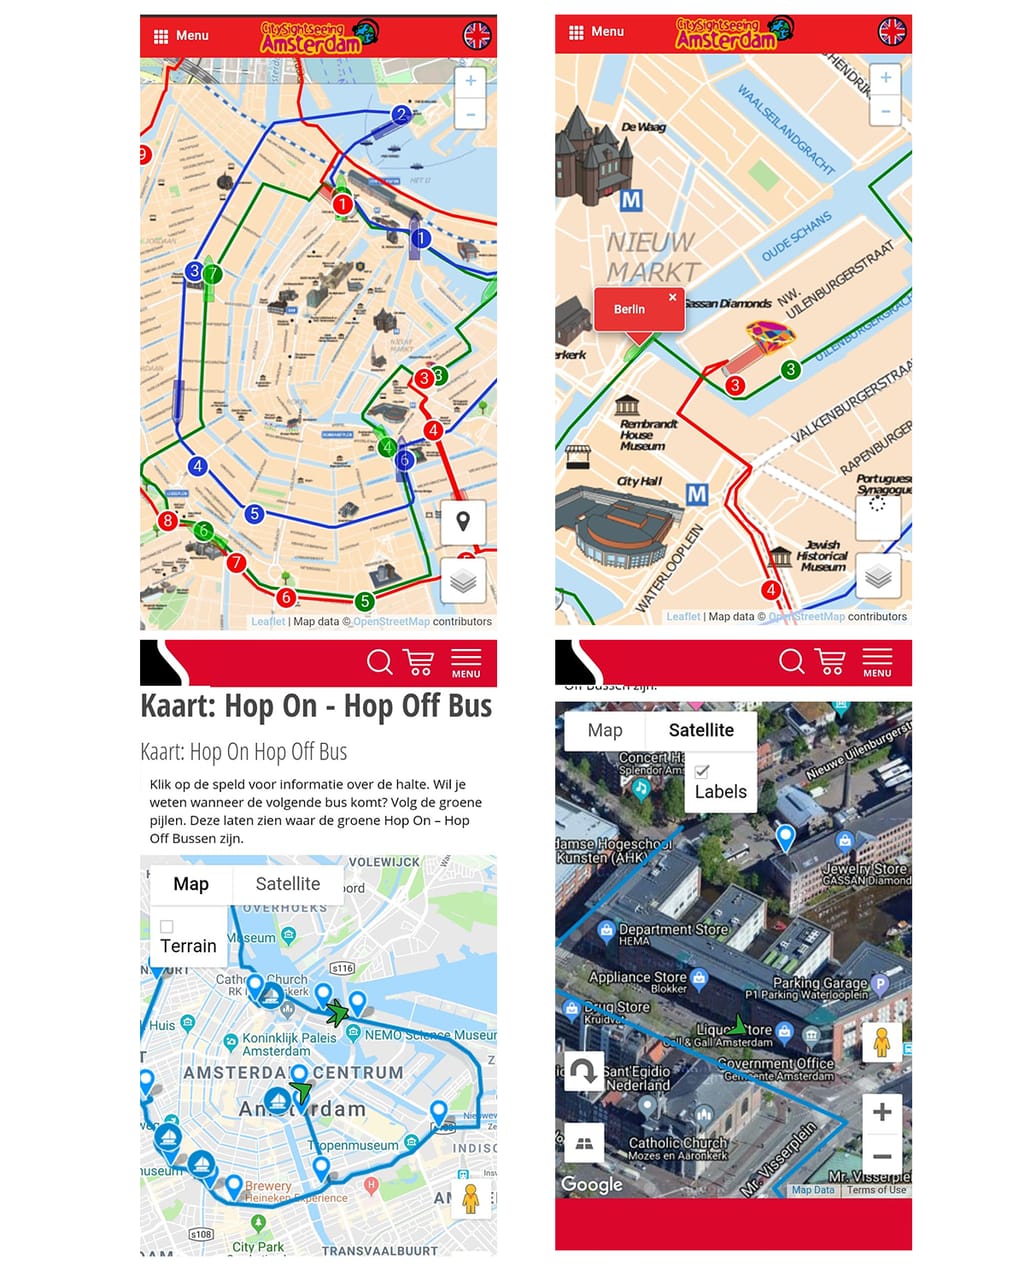 Sightseeing apps with live tracking of vehicles